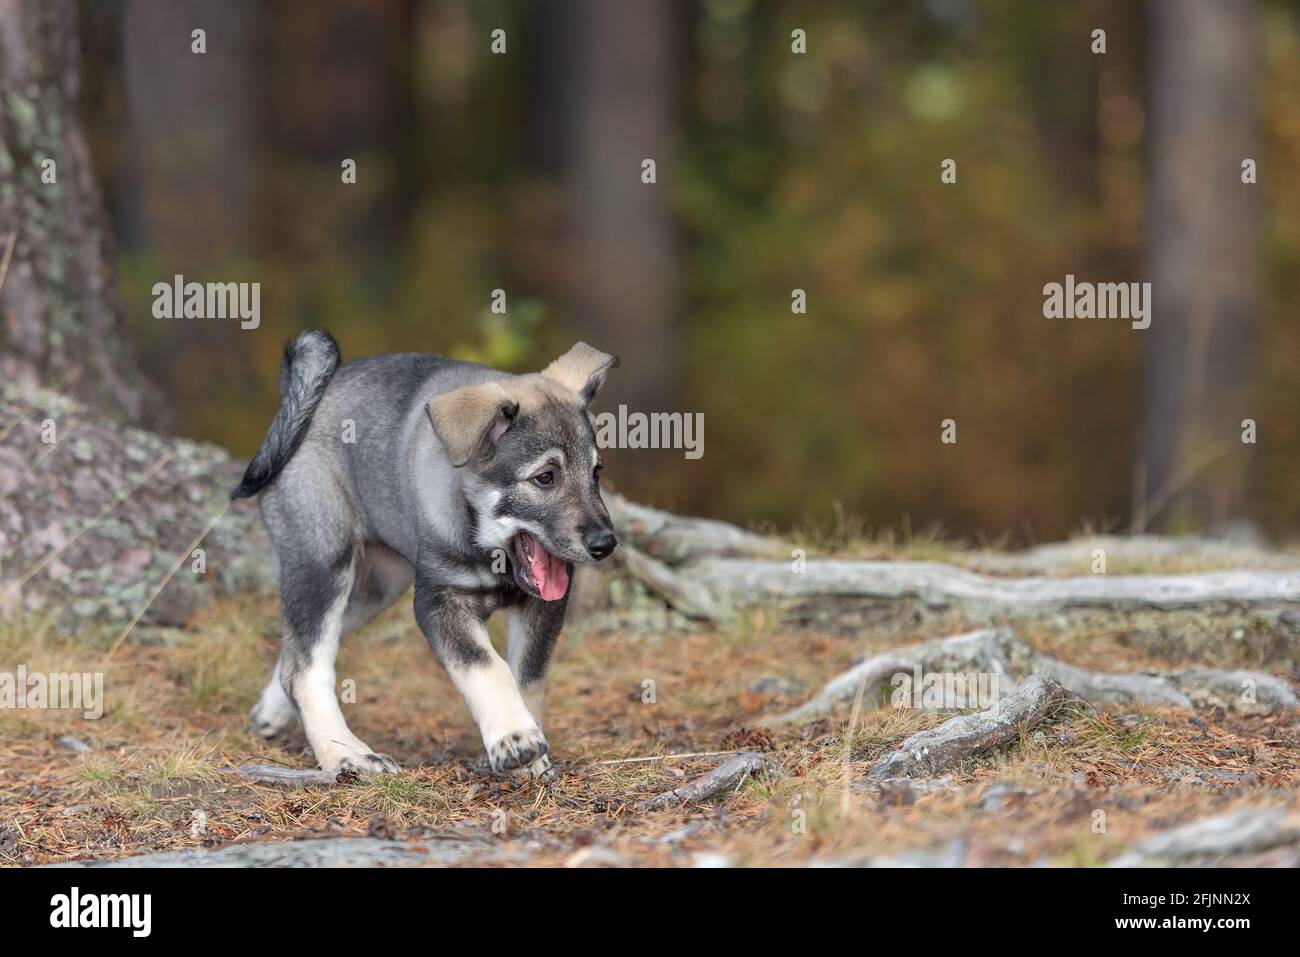 A selective focus of the gray adorable Swedish Elkhound puppy walking in the woods Stock Photo